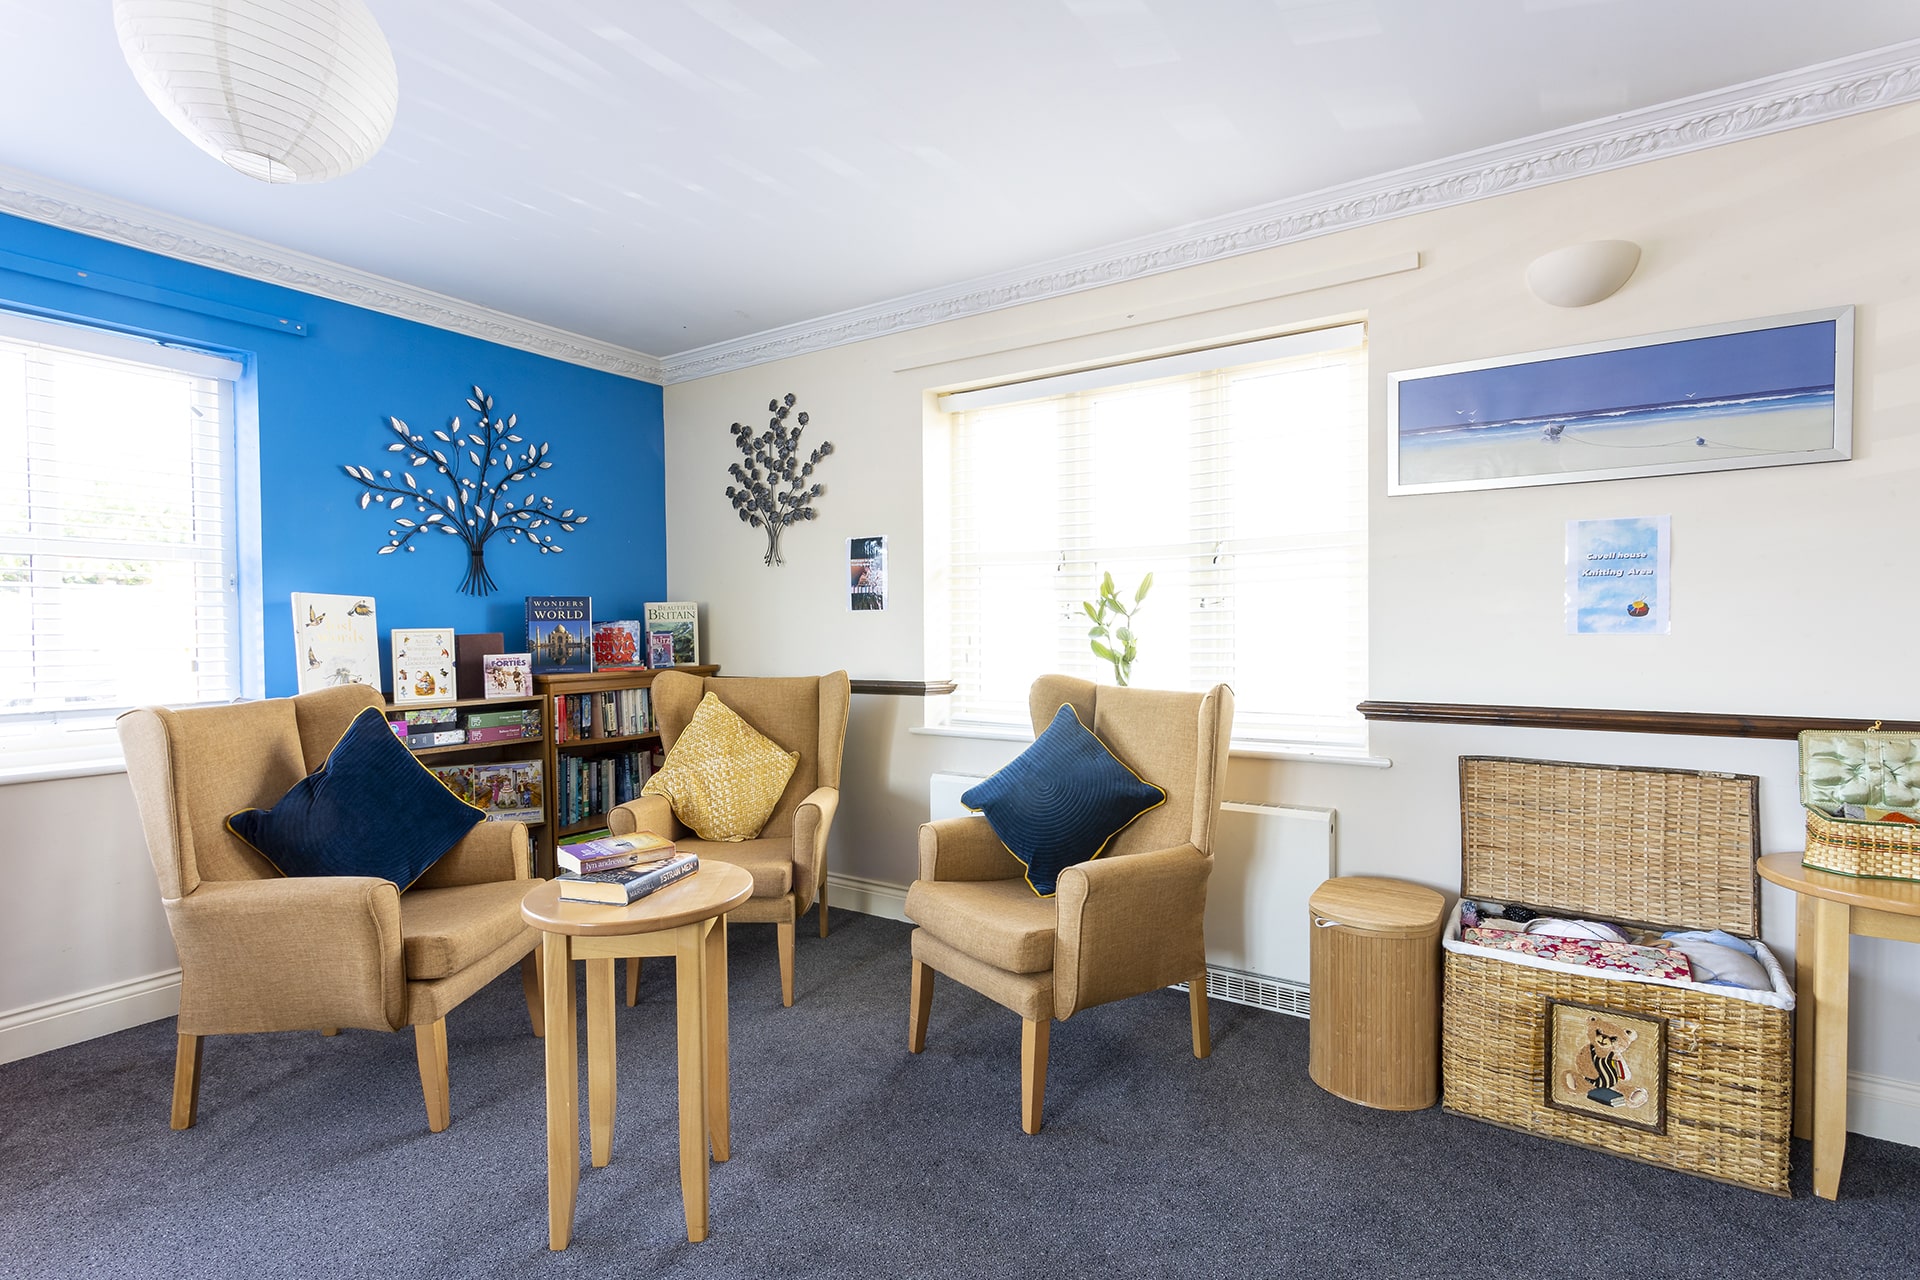 Activities lounge at Cavell House Care Home in Shoreham-by-Sea.